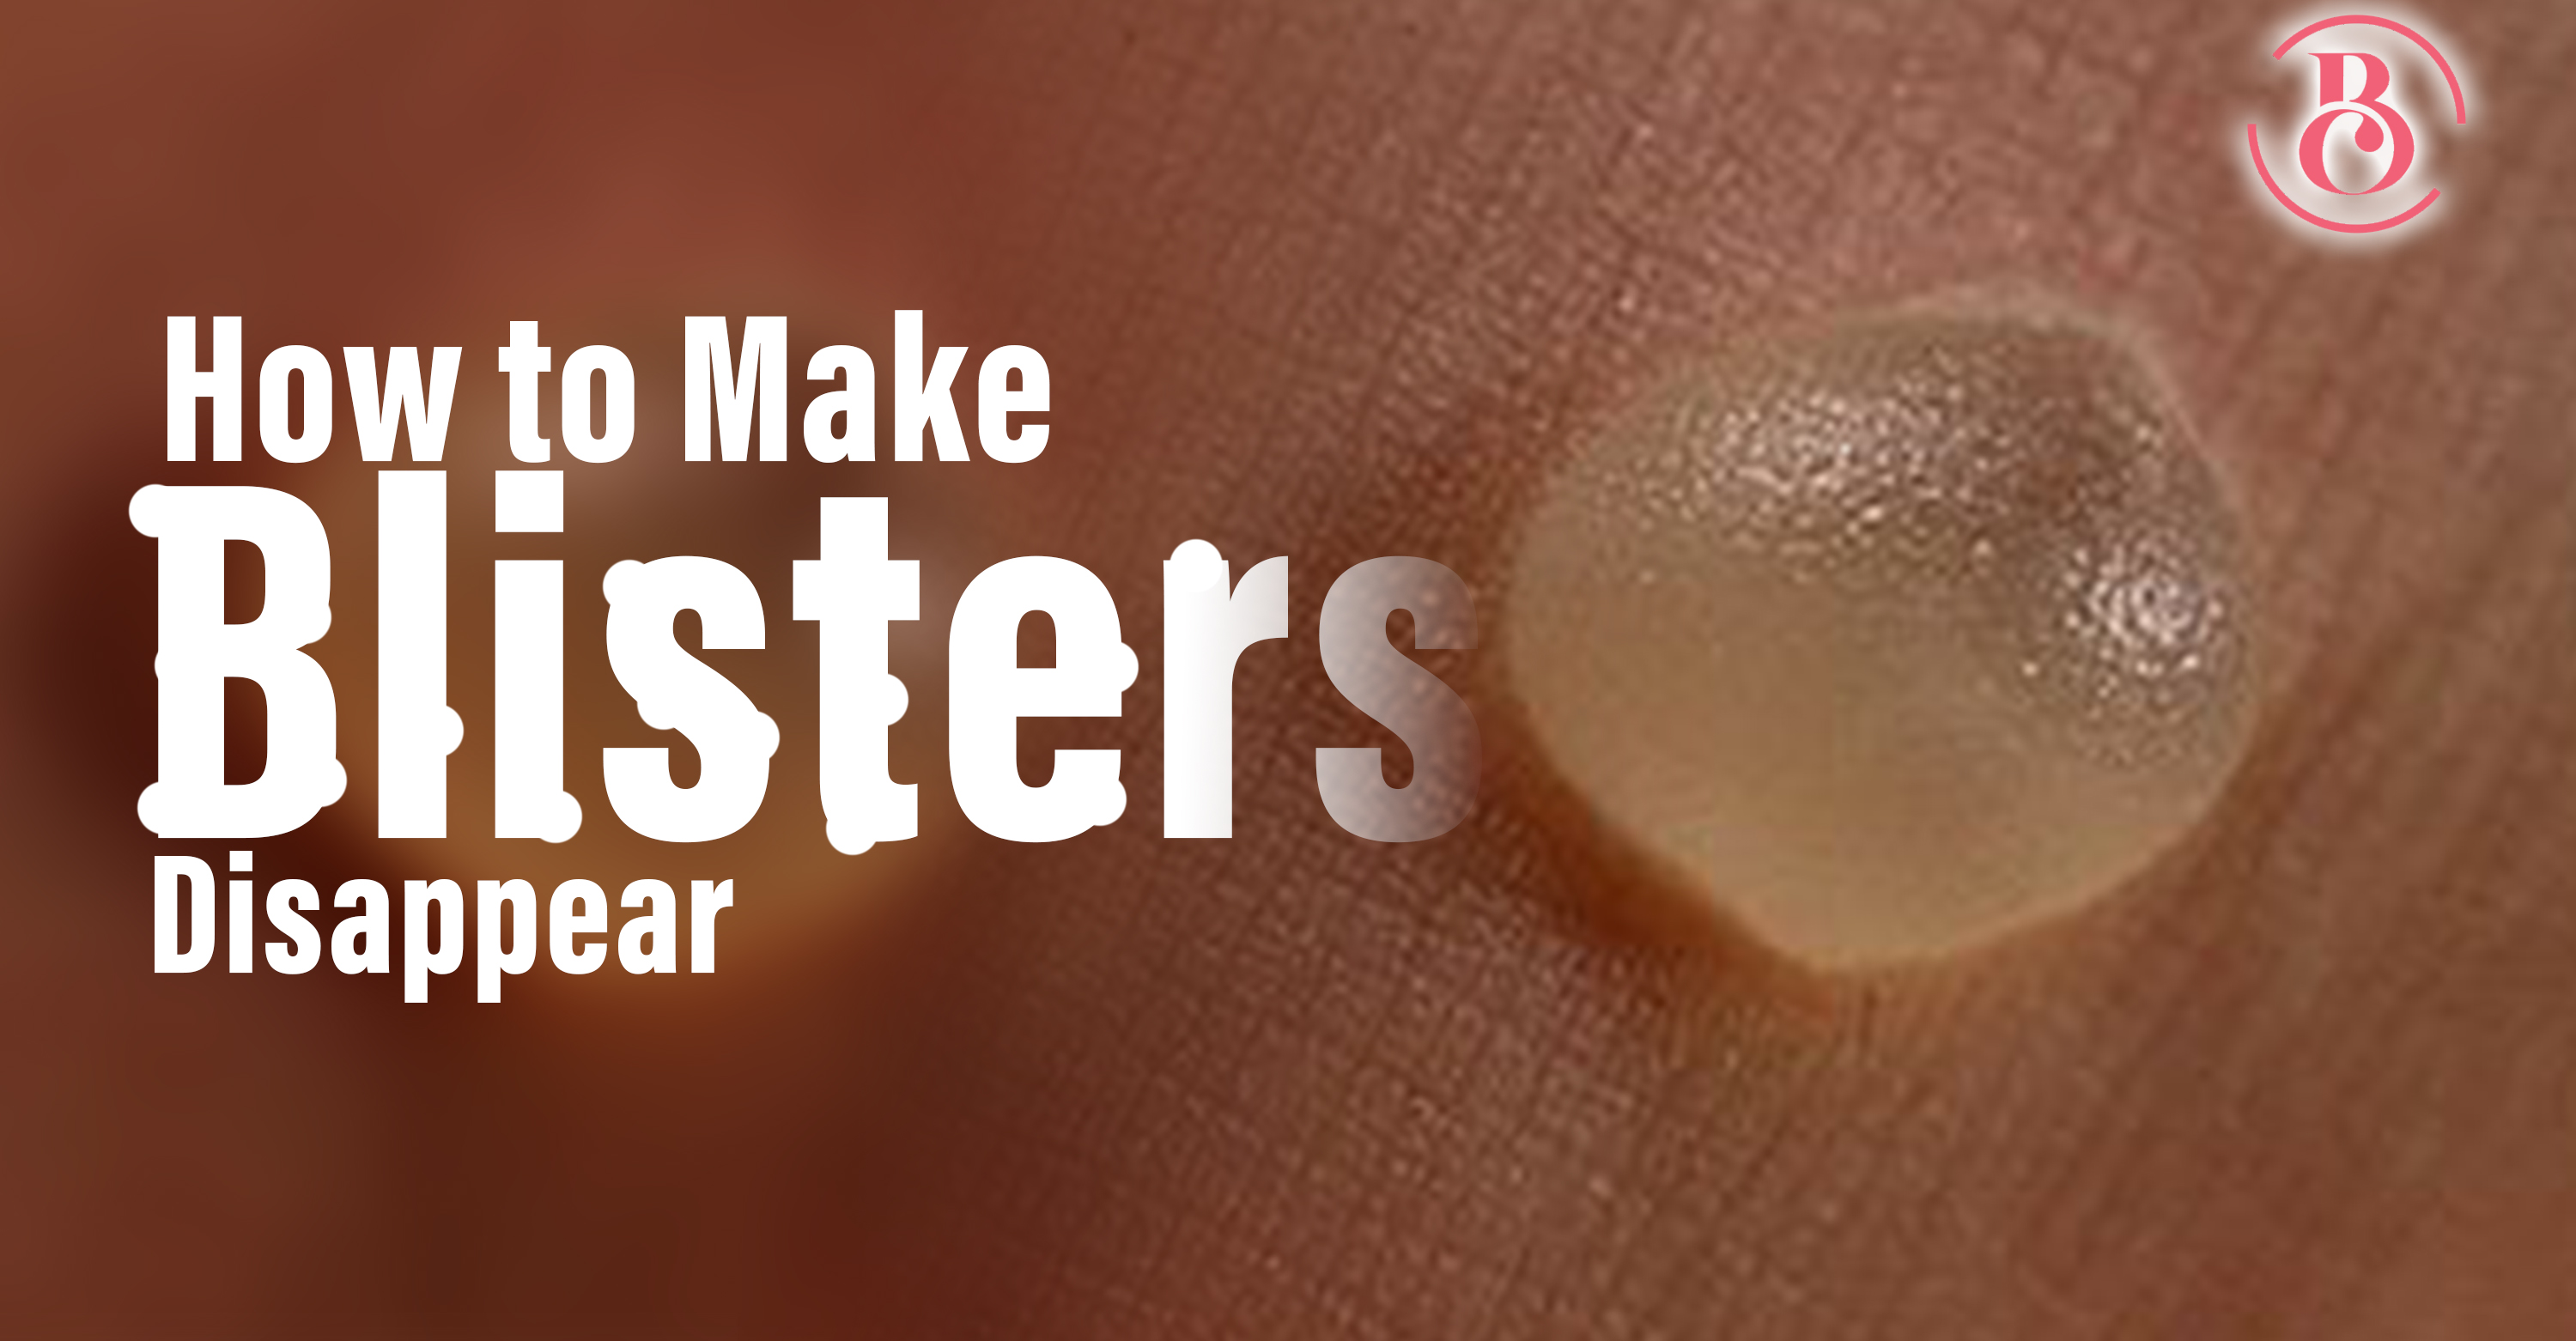 4 Sure Ways to Make Blisters Disappear